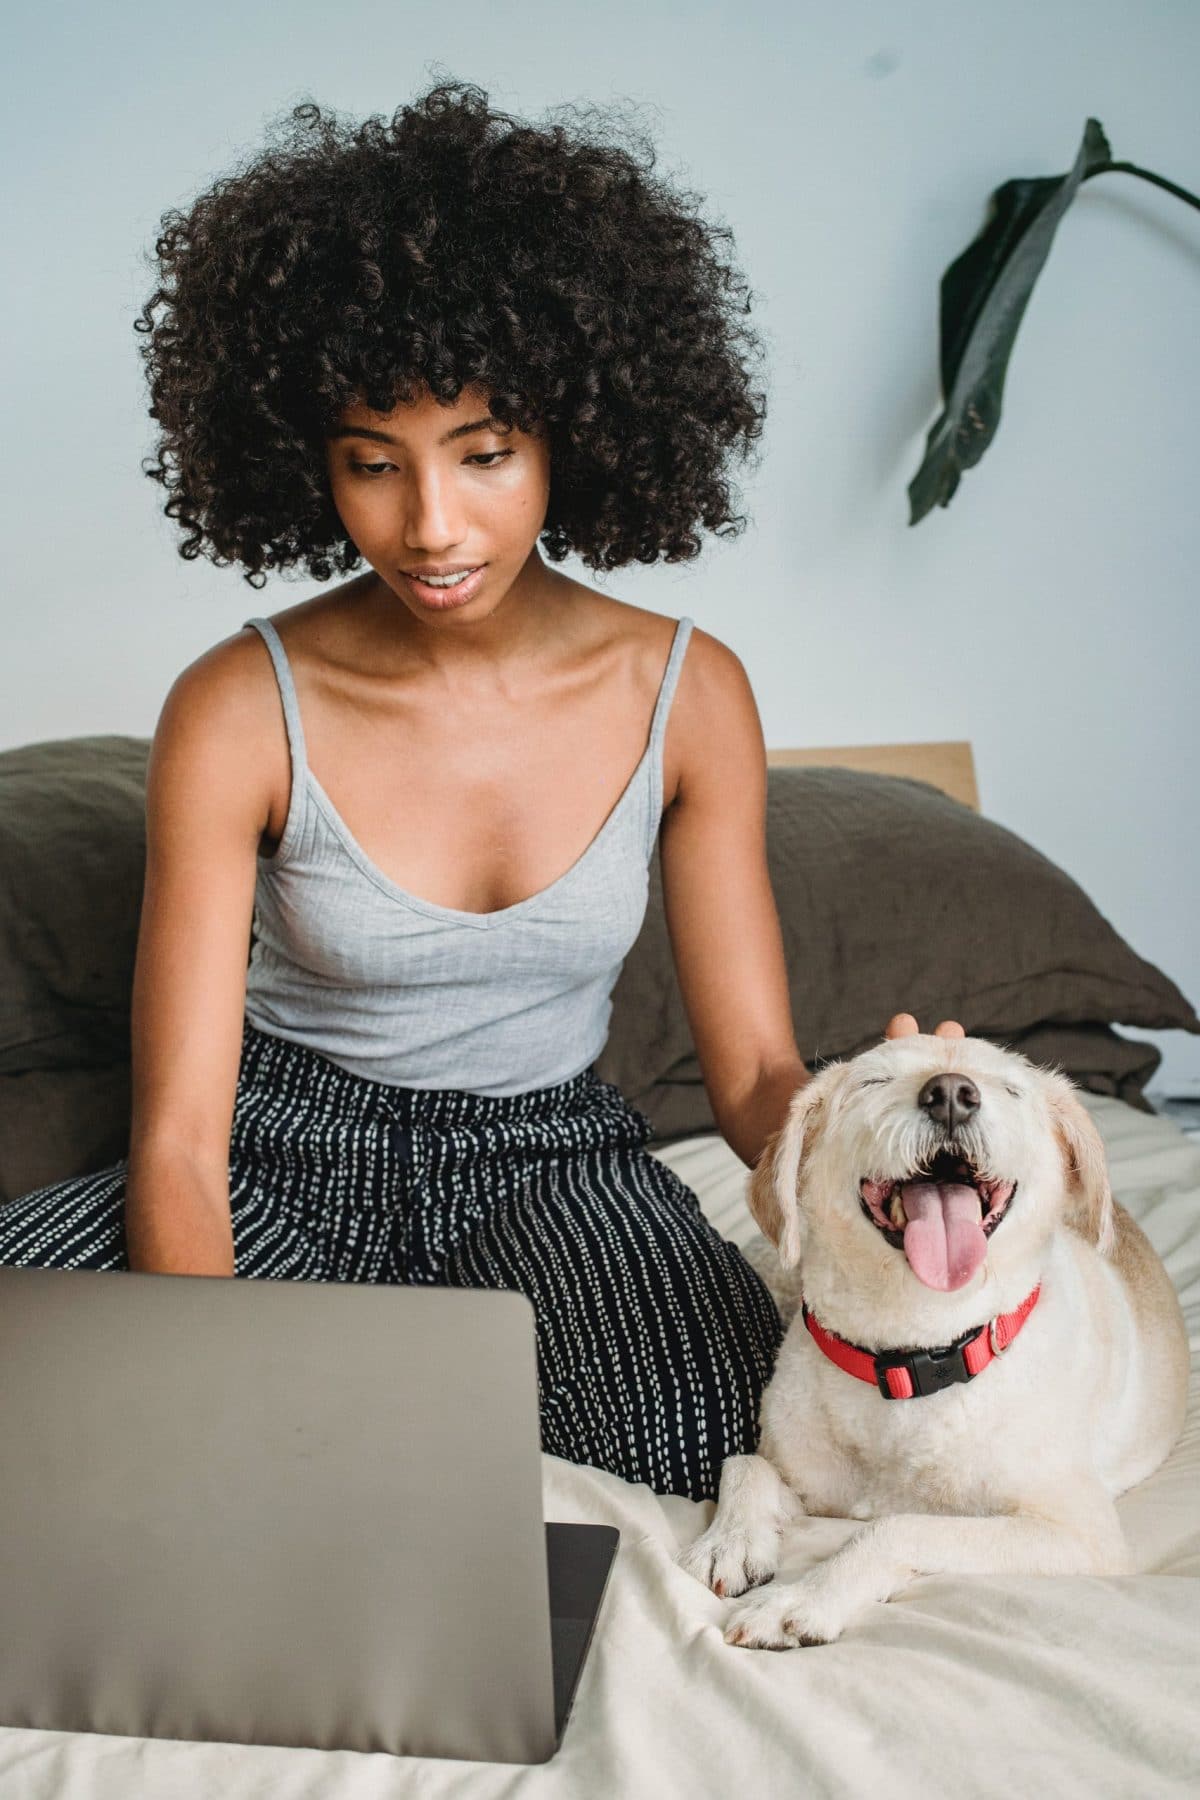 A young African American woman with curly hair attends a trauma therapy session on her laptop from bed. A small dog with a very happy expression sits next to her.